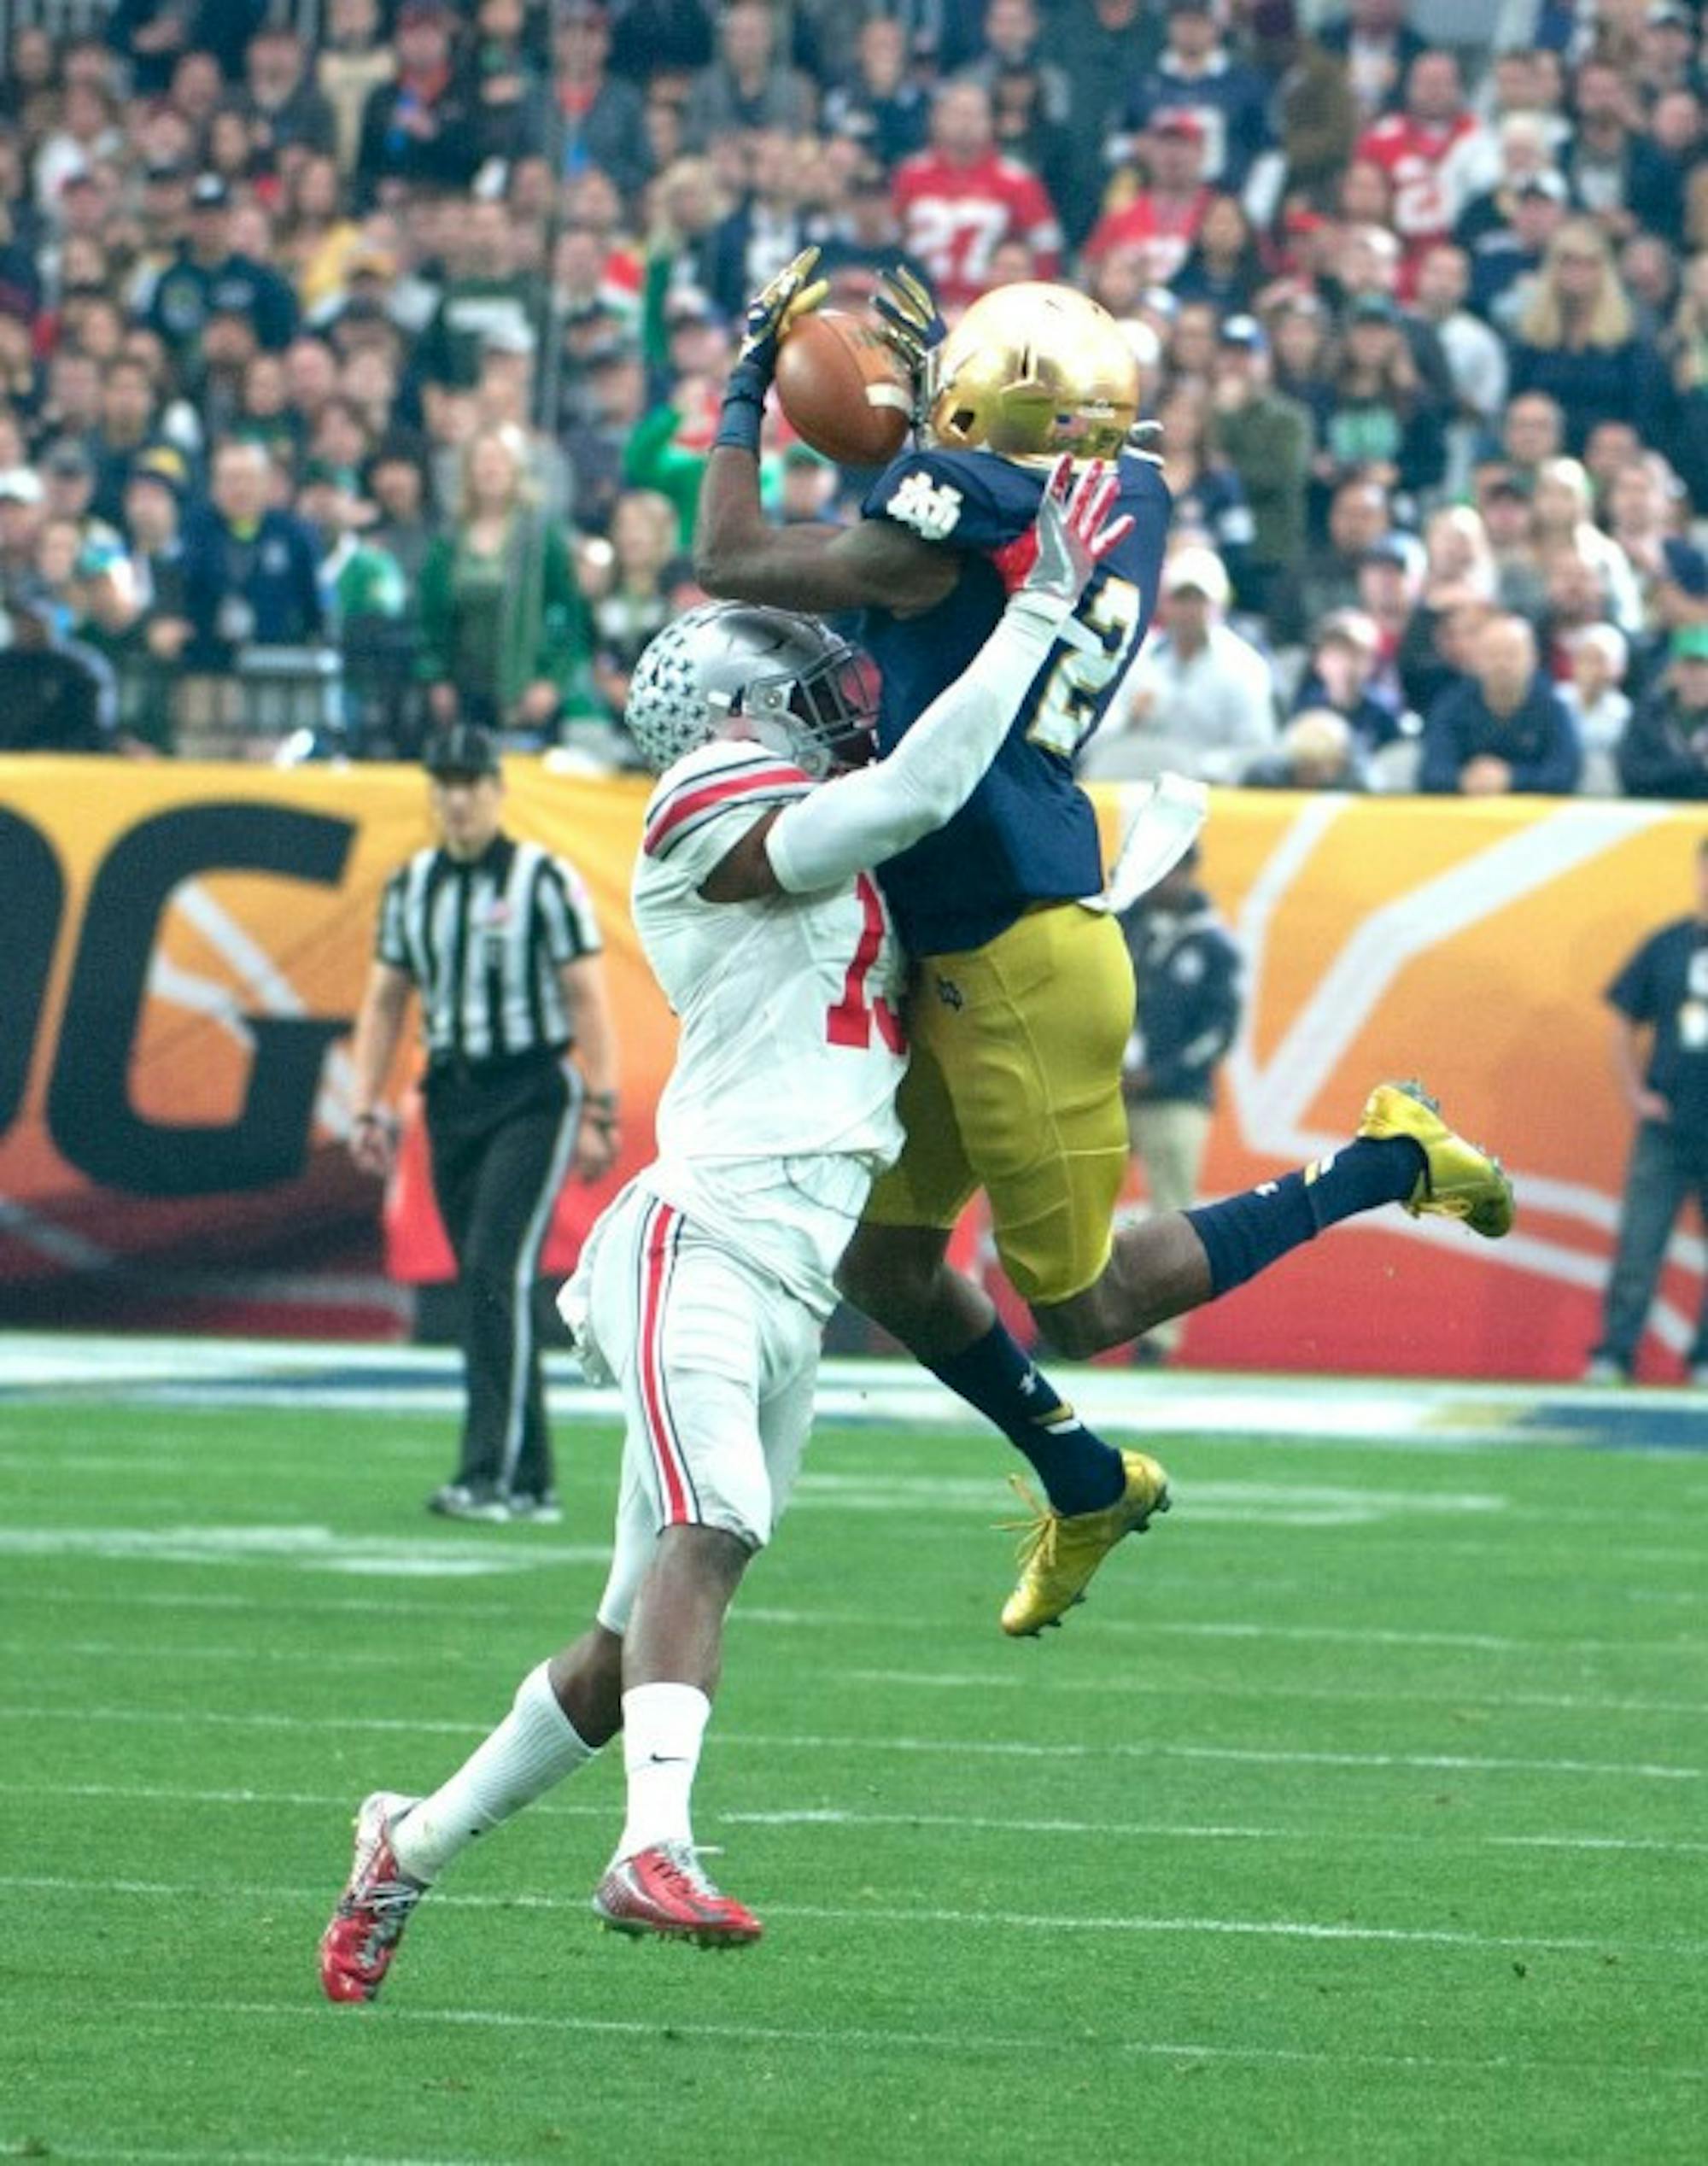 Senior receiver Chris Brown battles for the ball in the air with Ohio State sophomore Eli Apple during Notre Dame's 44-28 loss to the Buckeyes on Friday in Glendale, Arizona. Brown had four catches, including a touchdown, for 35 yards in the game.